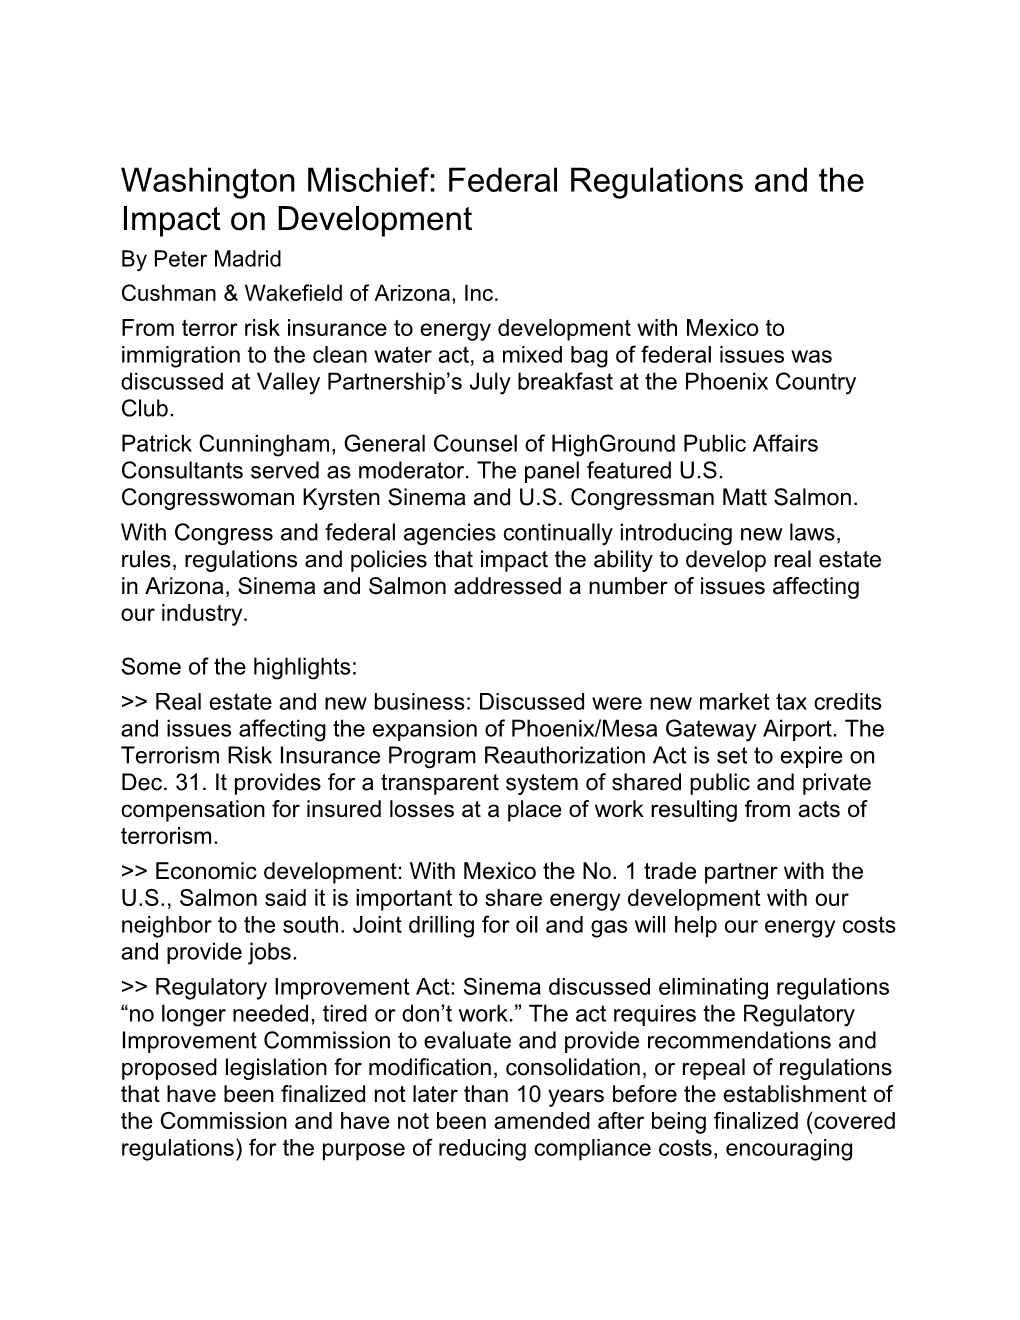 Washington Mischief: Federal Regulations and the Impact on Development